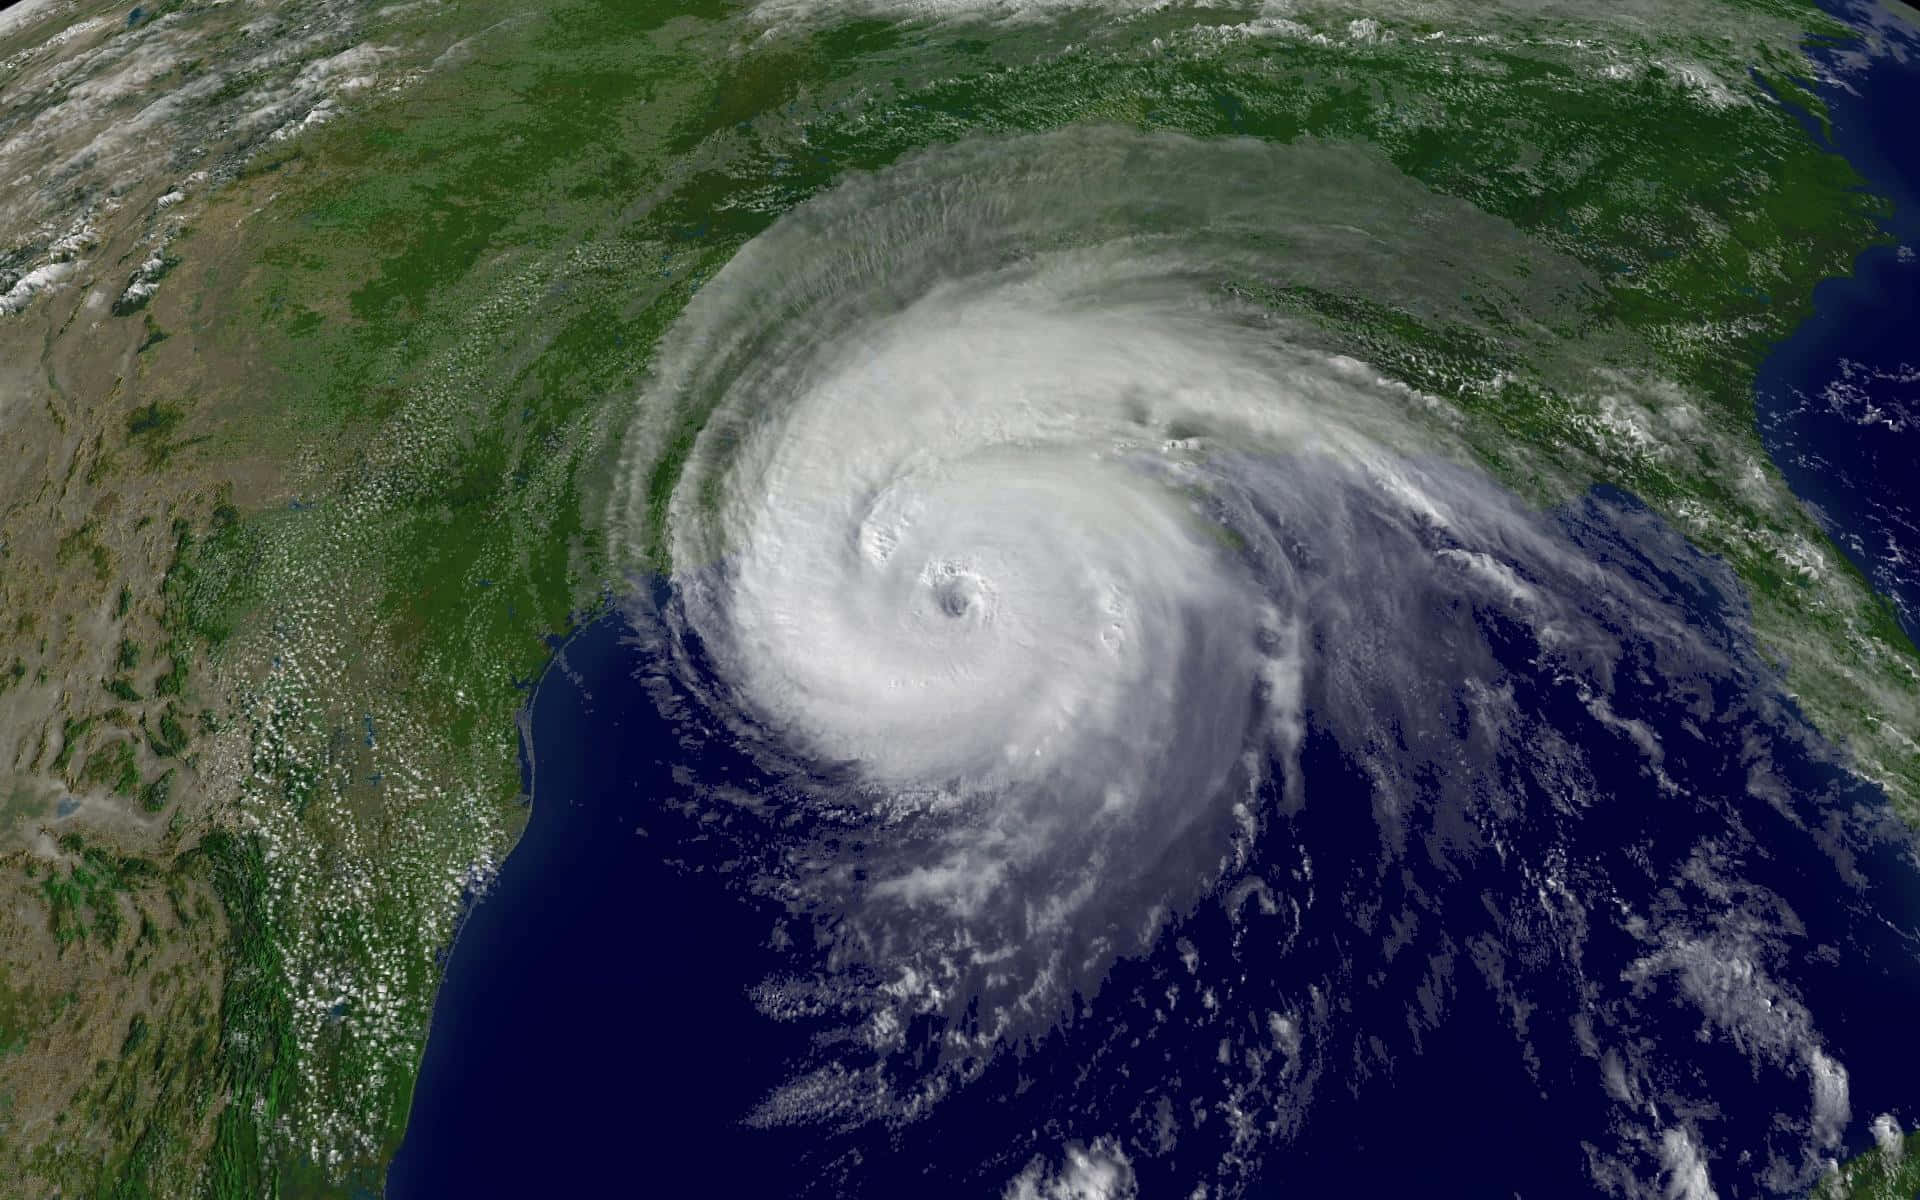 Majestic And Fearsome Power - Aerial View Of A Hurricane